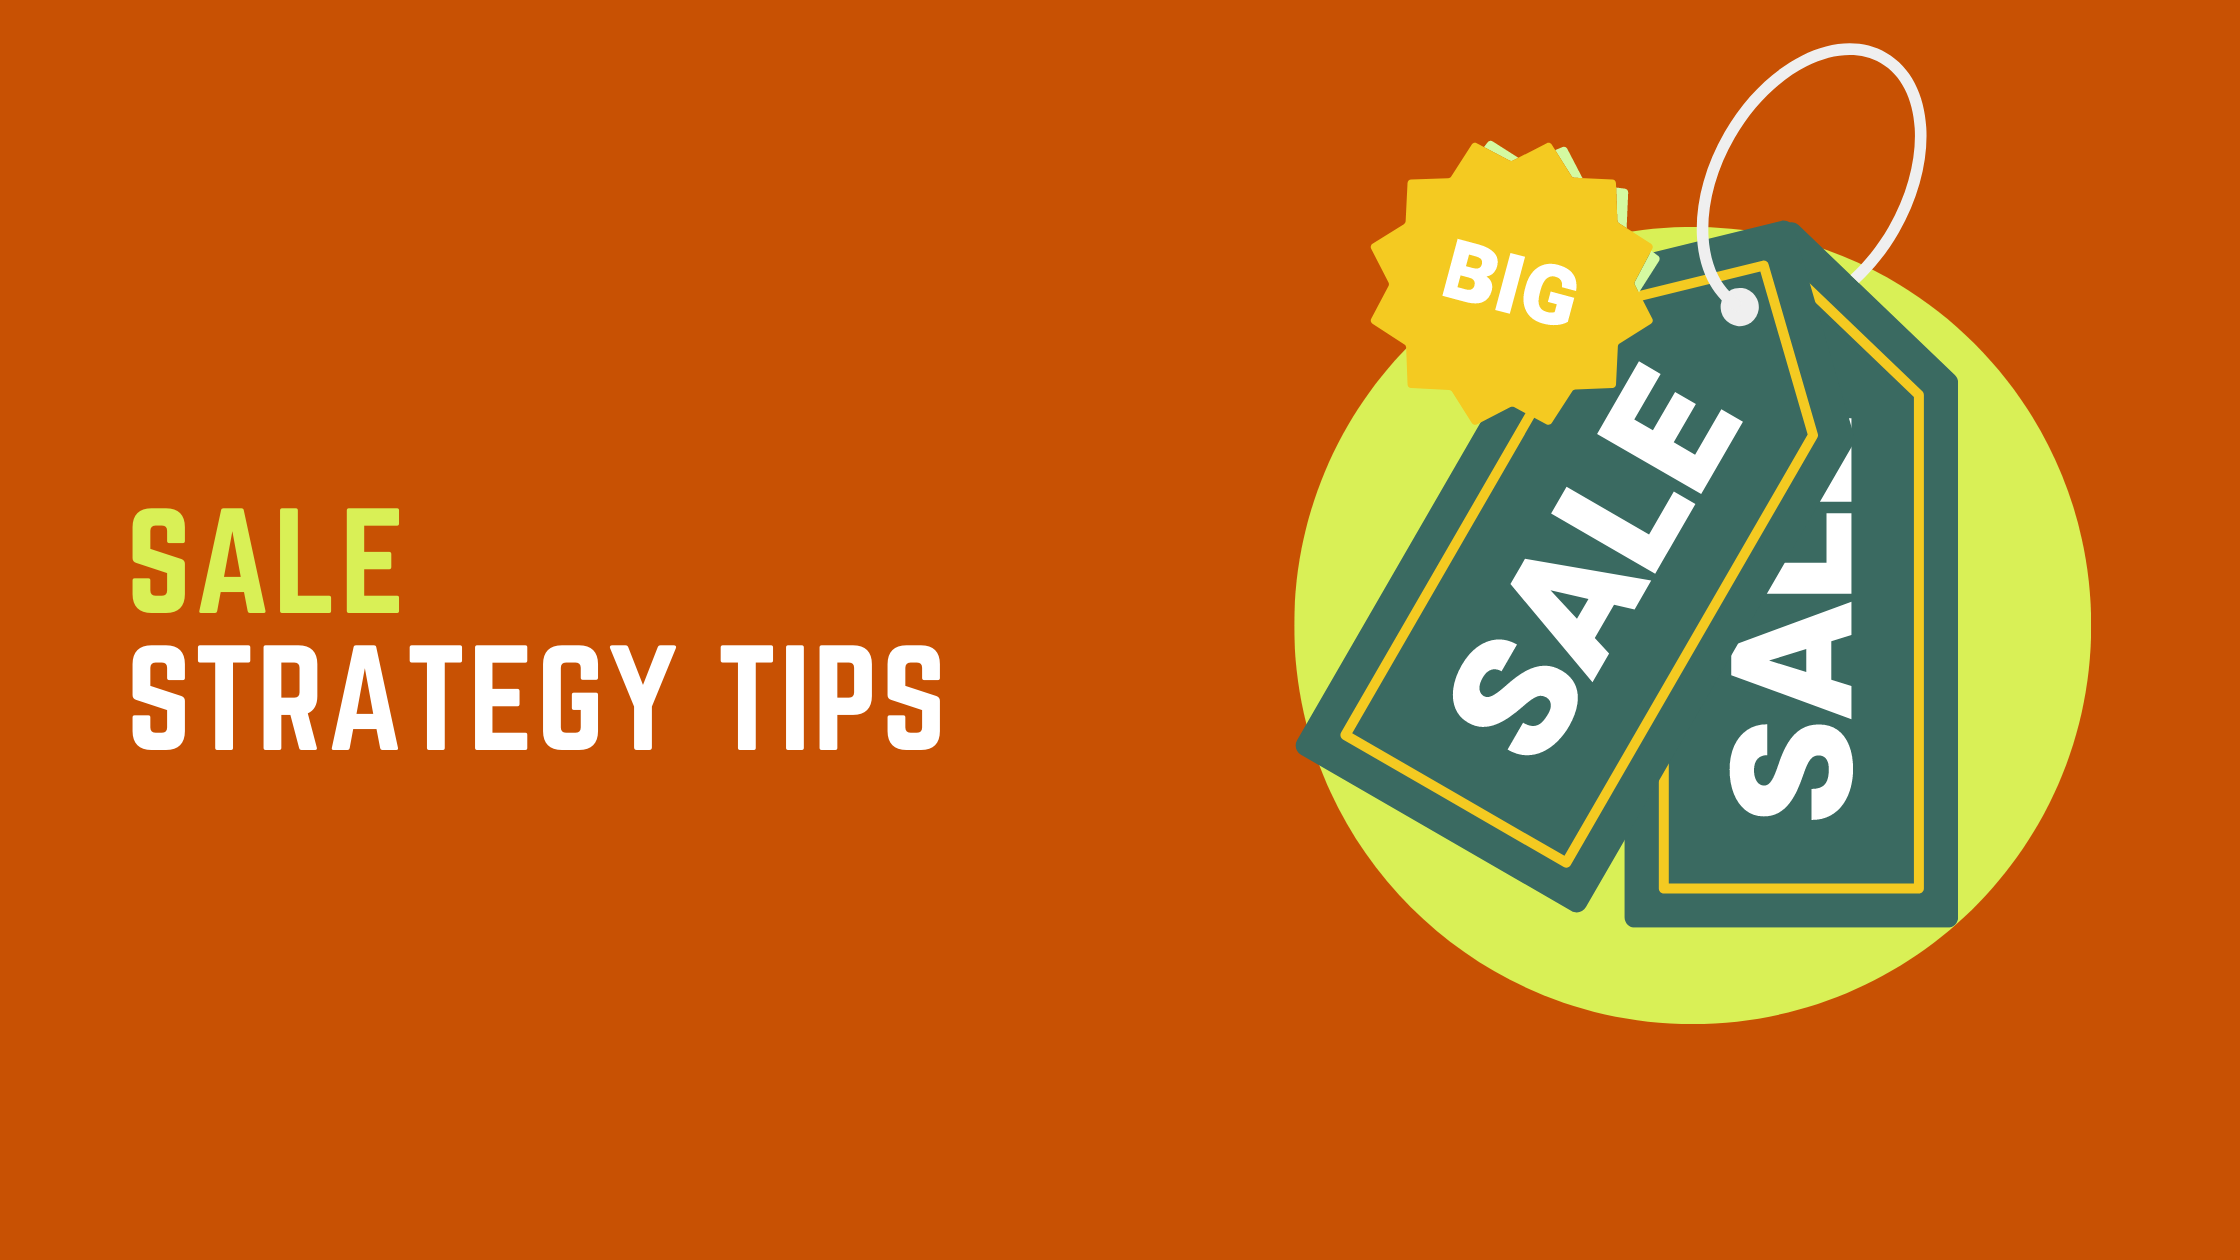 Tips for creating better Sales strategies for your Shopify store